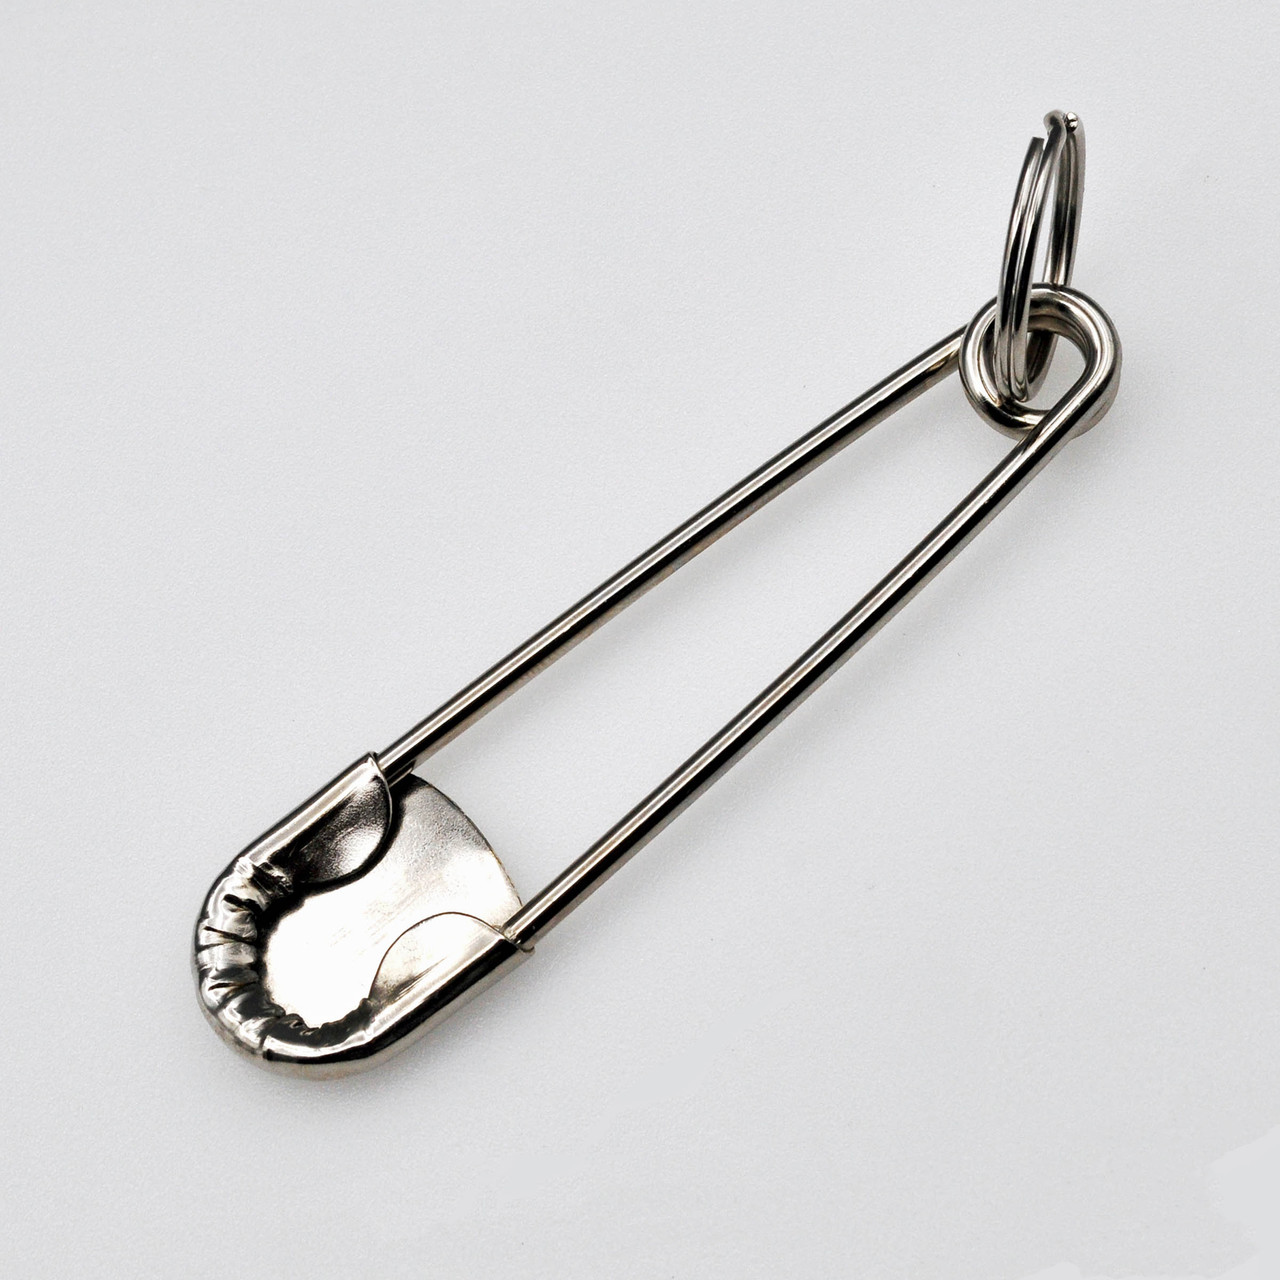 Shop for and Buy Nickel Plated Jumbo Safety Pin Key Ring at .  Large selection and bulk discounts available.